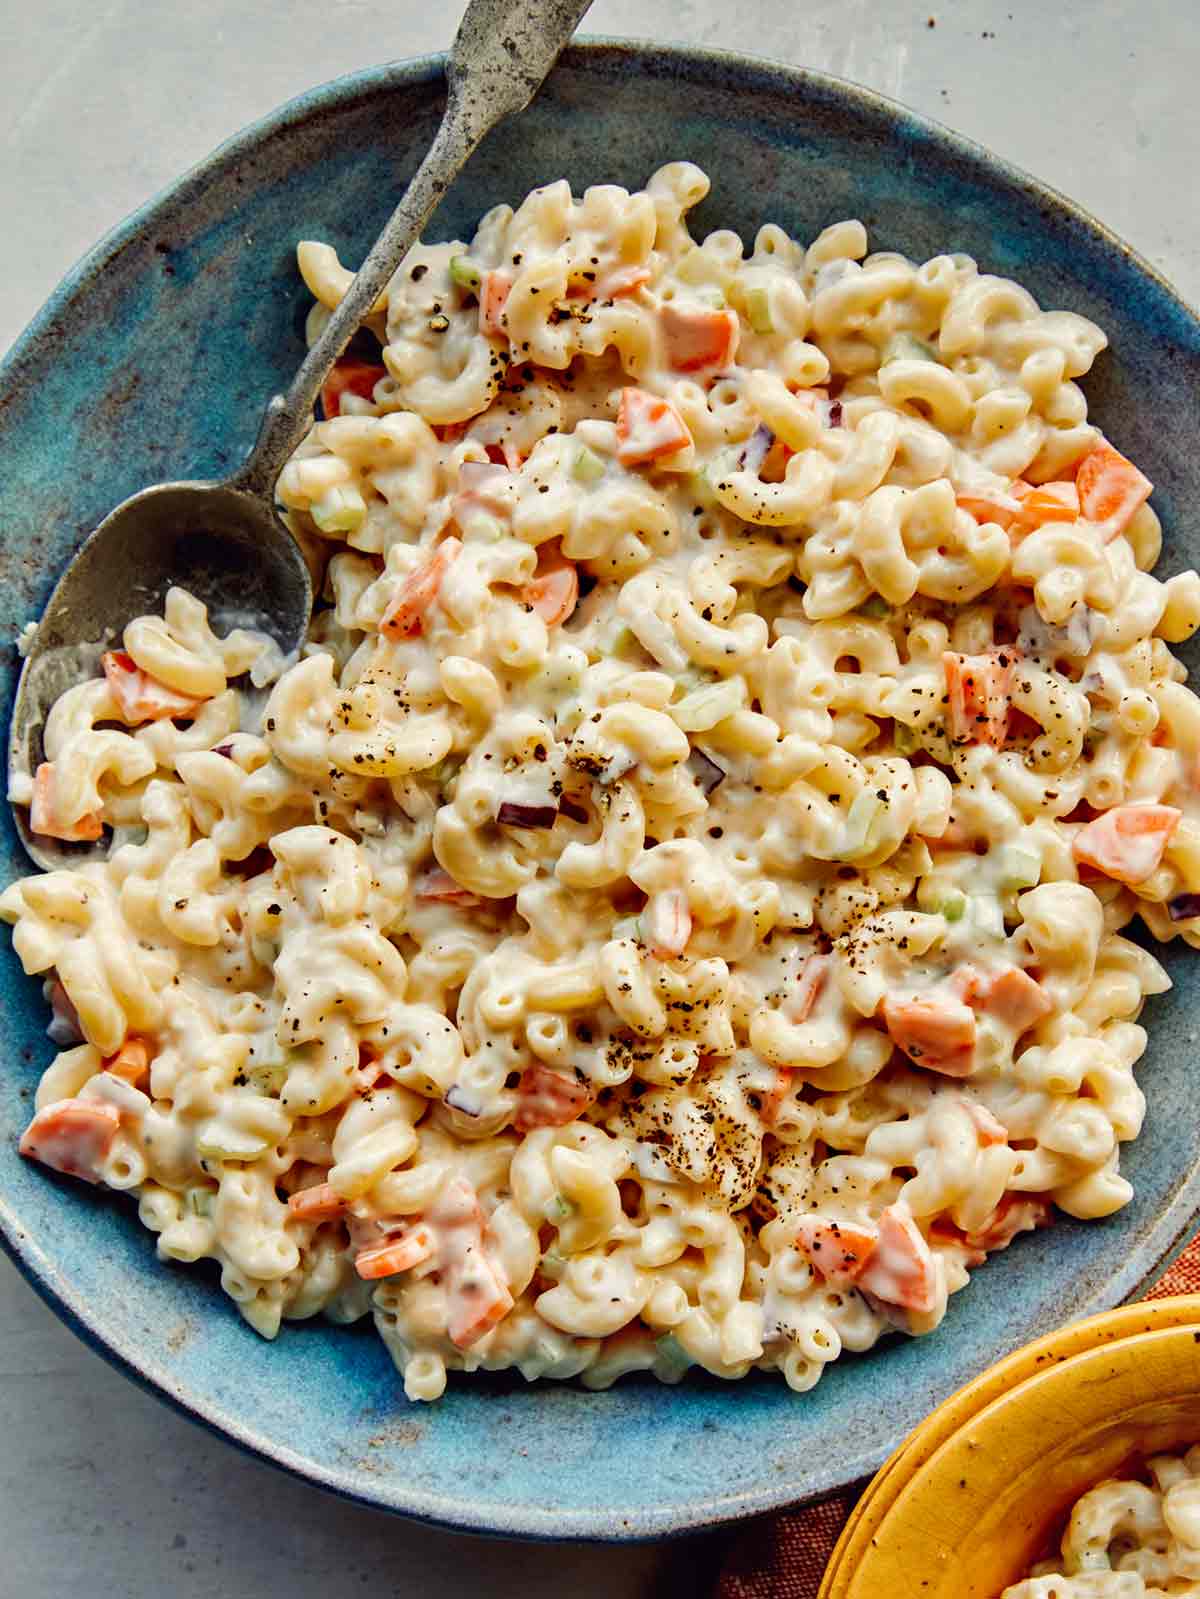 Macaroni salad made in the Hawaiian style in a bowl with a spoon in it.